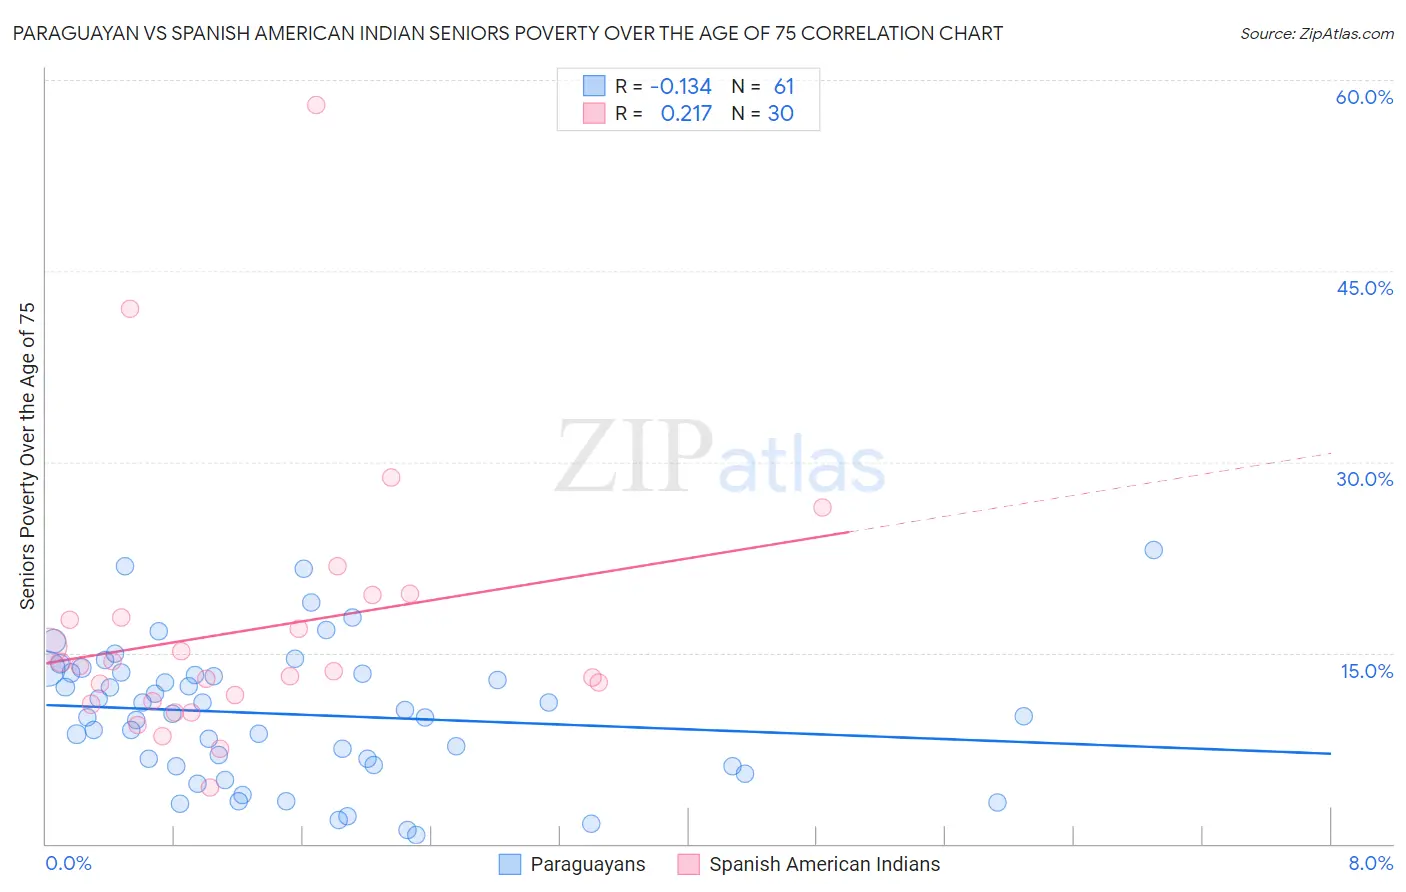 Paraguayan vs Spanish American Indian Seniors Poverty Over the Age of 75